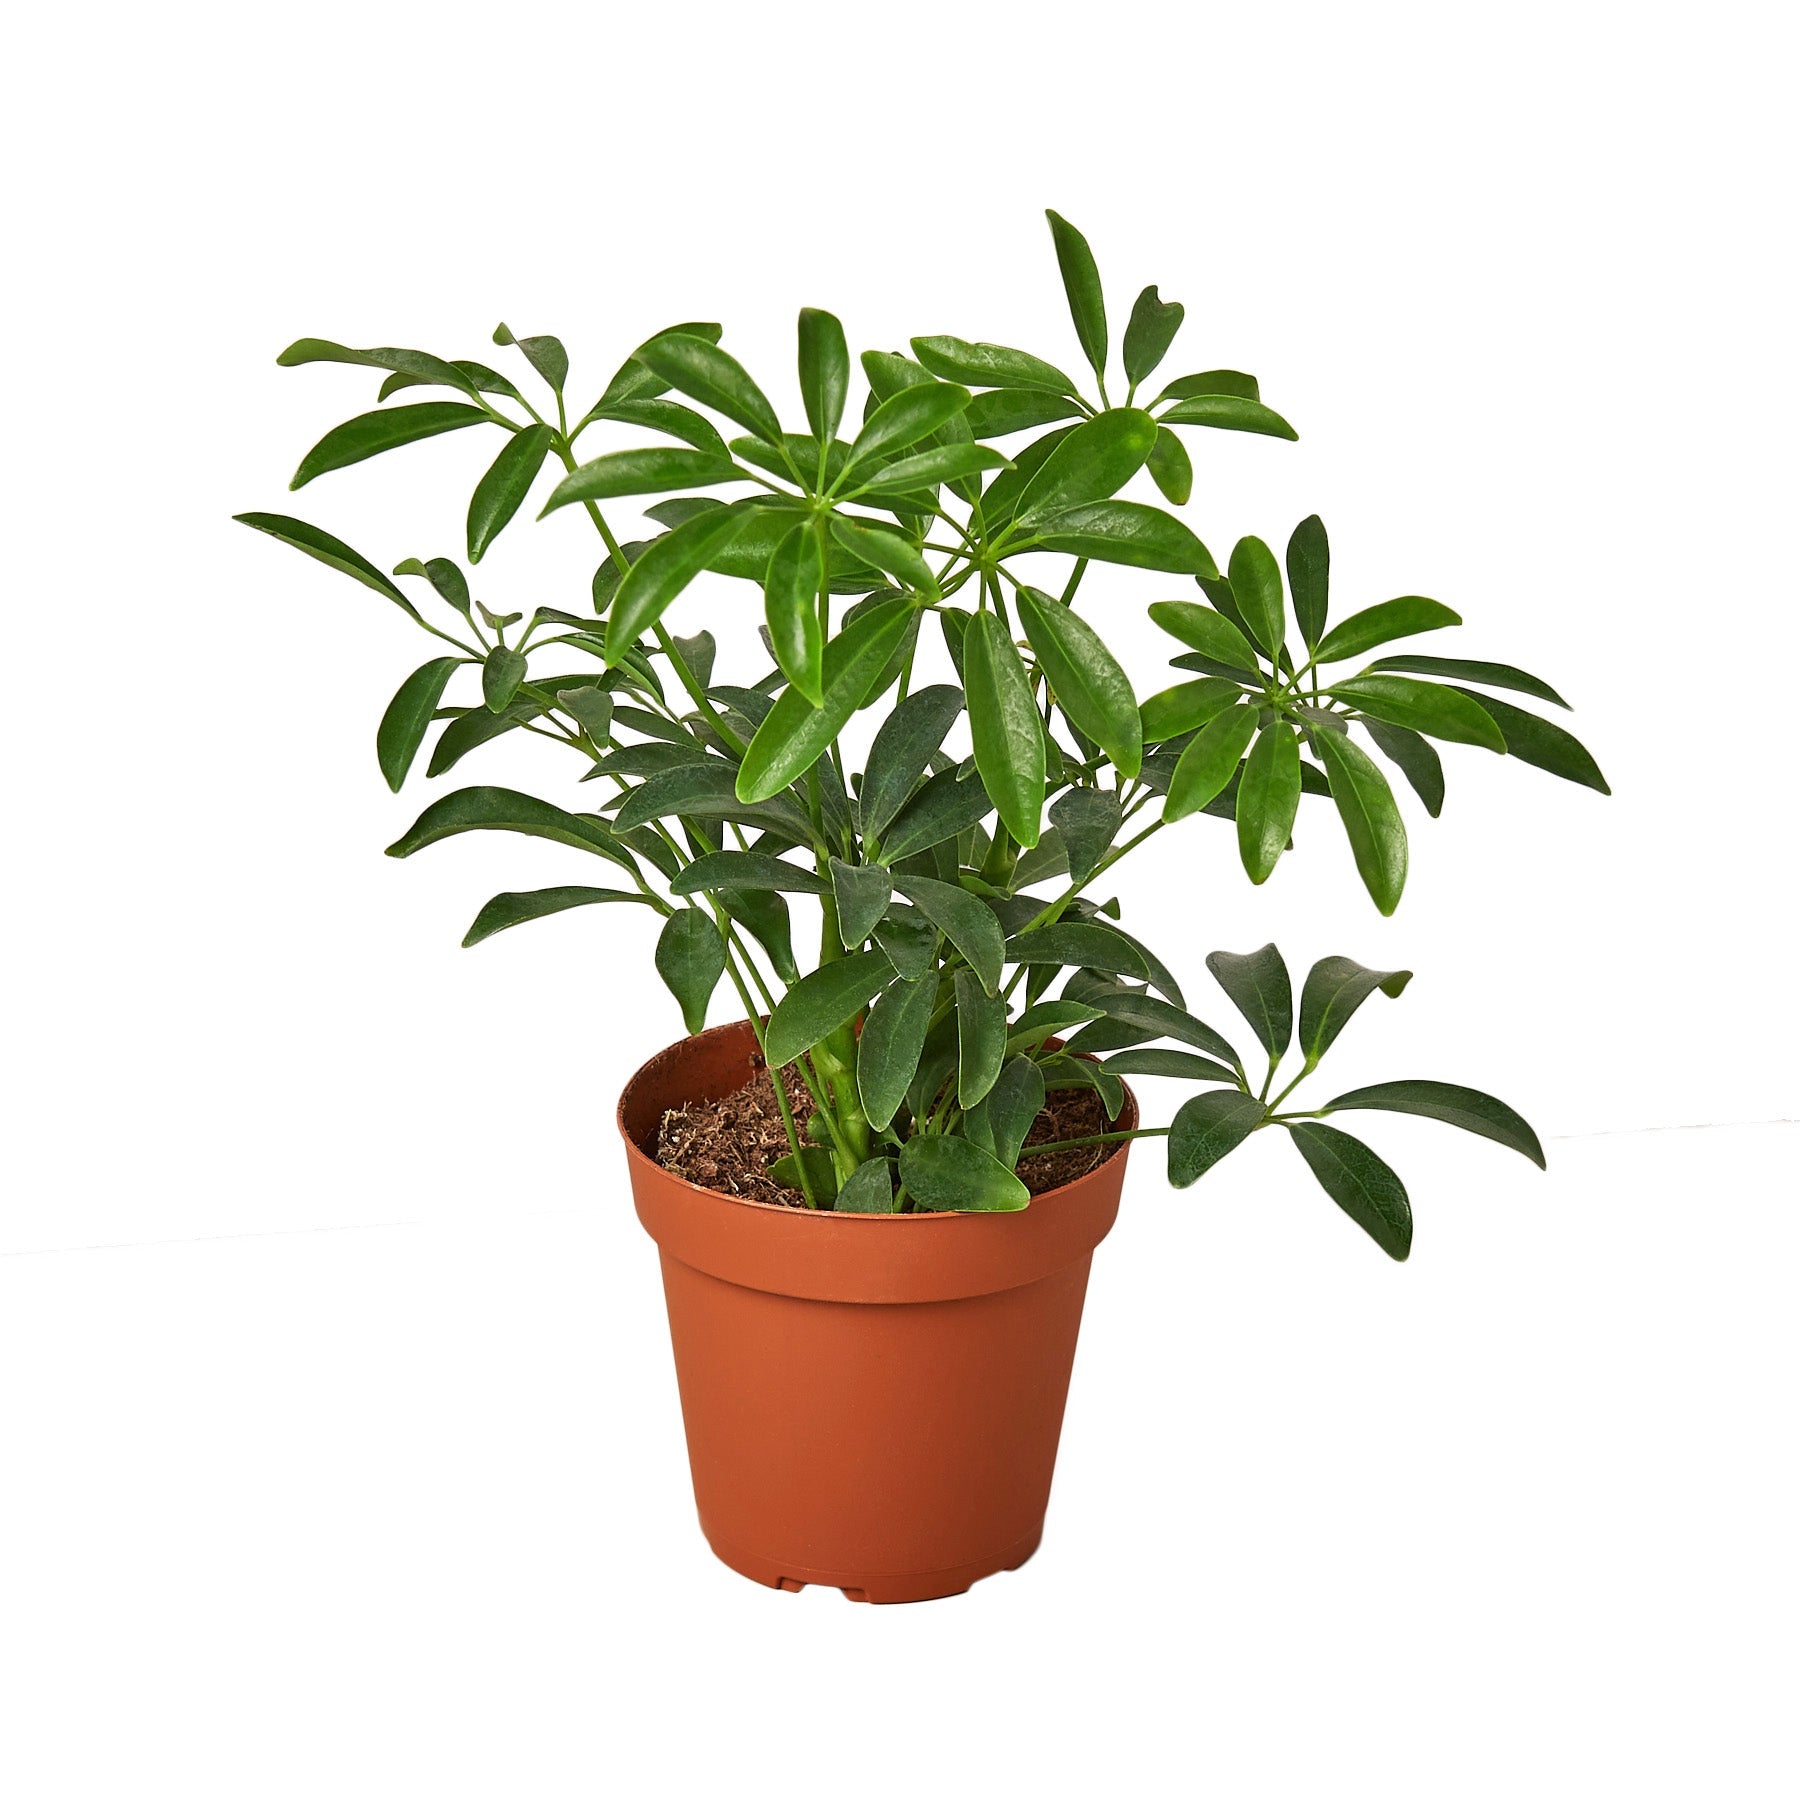 A potted plant on a white background available at a nearby garden center.